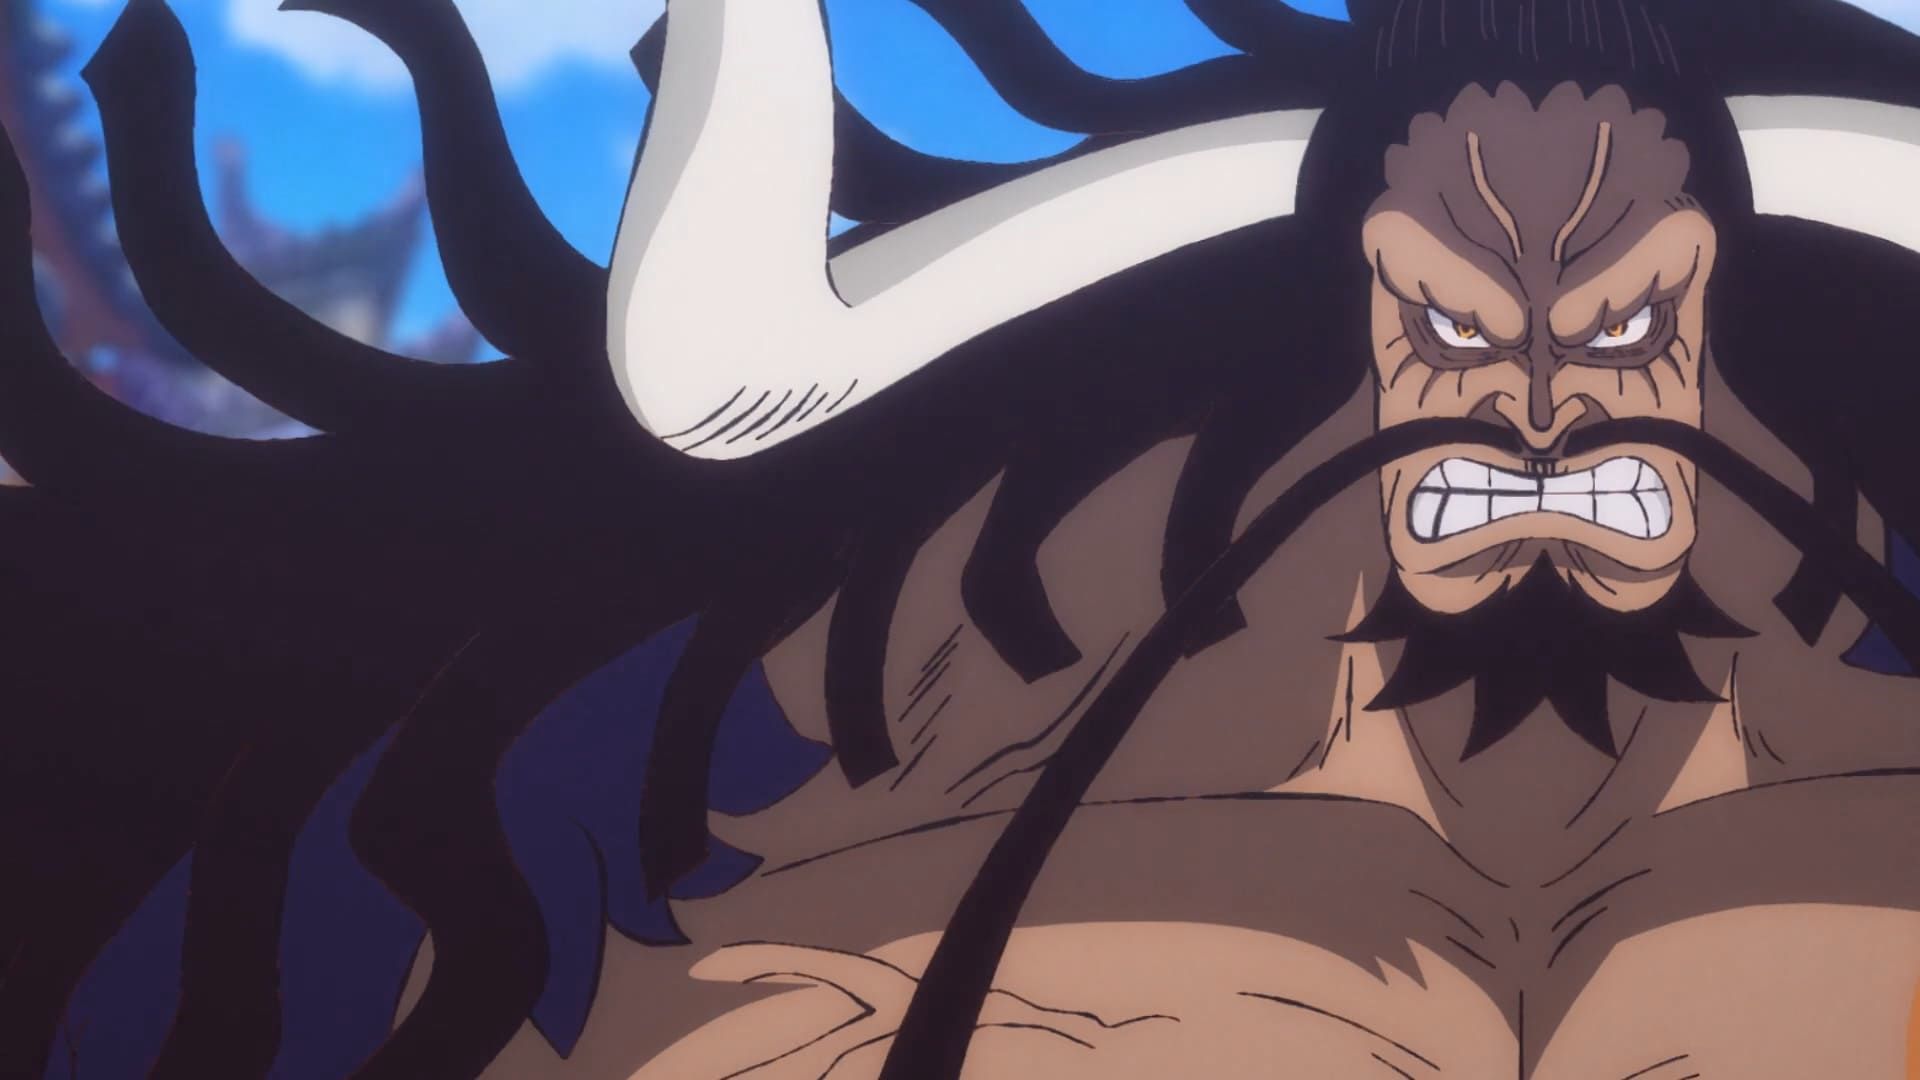 Kaido as seen in the show (Image via Toei Animation)